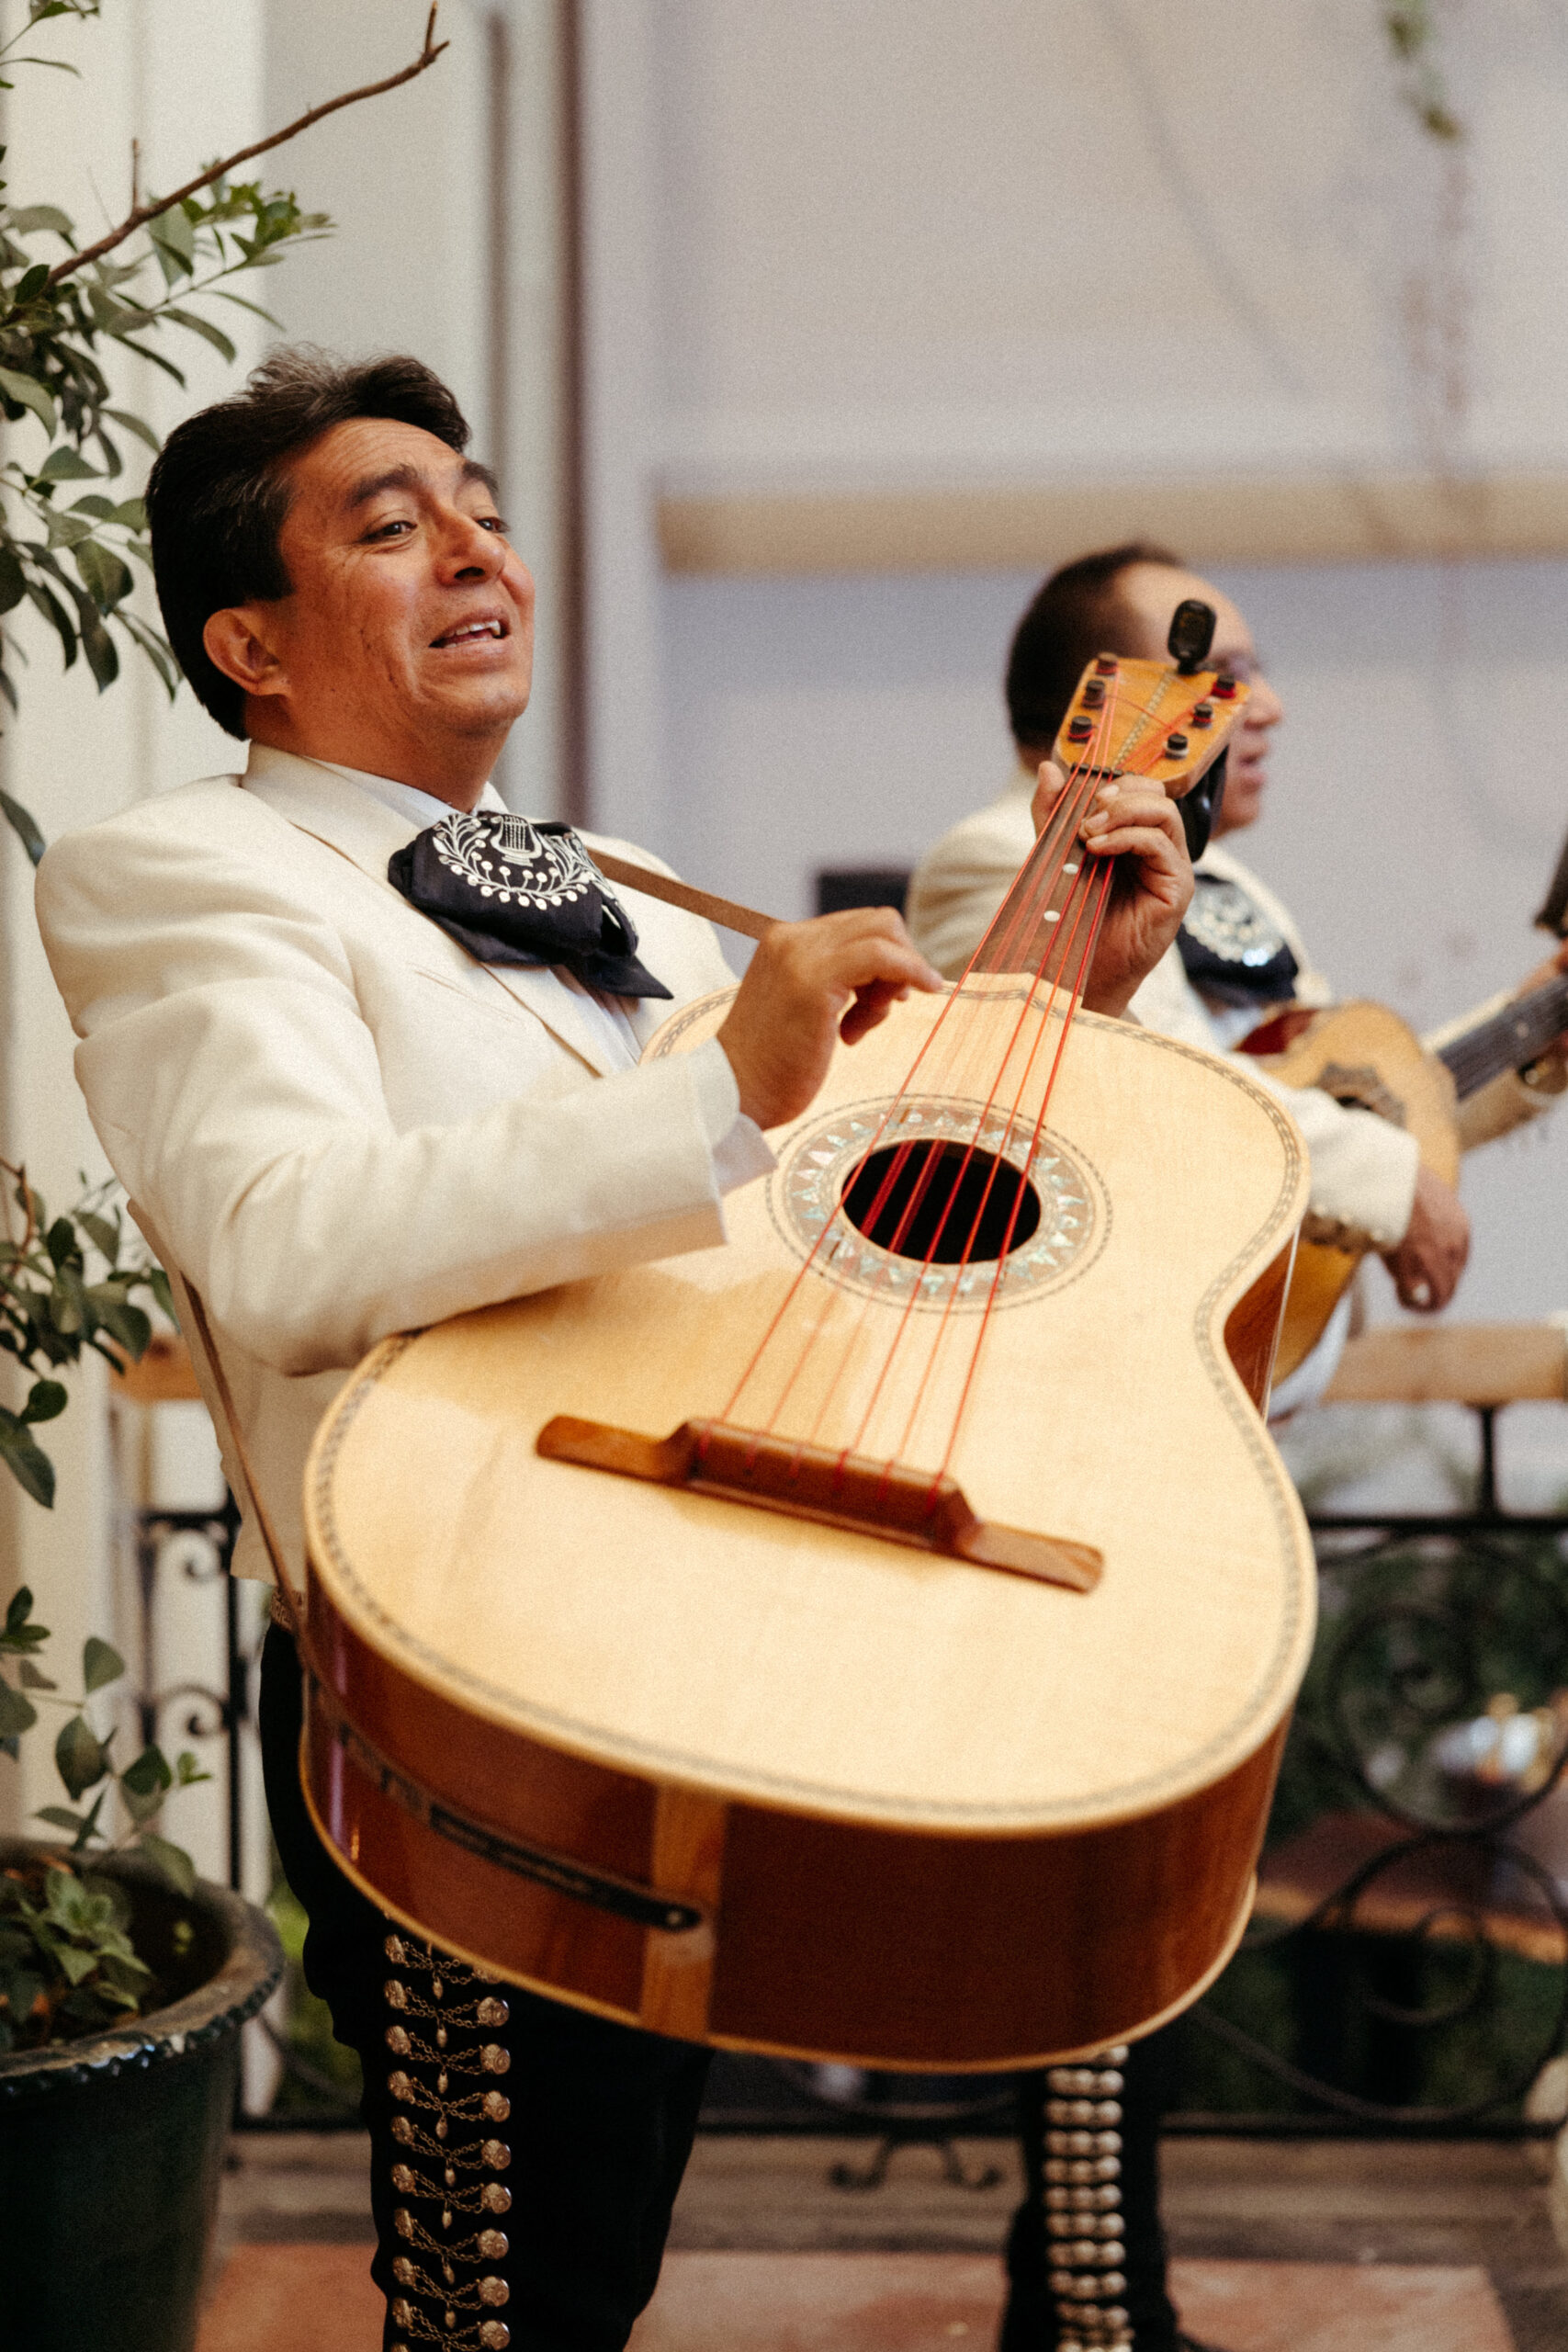 Mariachi Band plays live music from the balcony during a dreamy wedding day at Salon Barcelona in Mexico City, Mexico! 